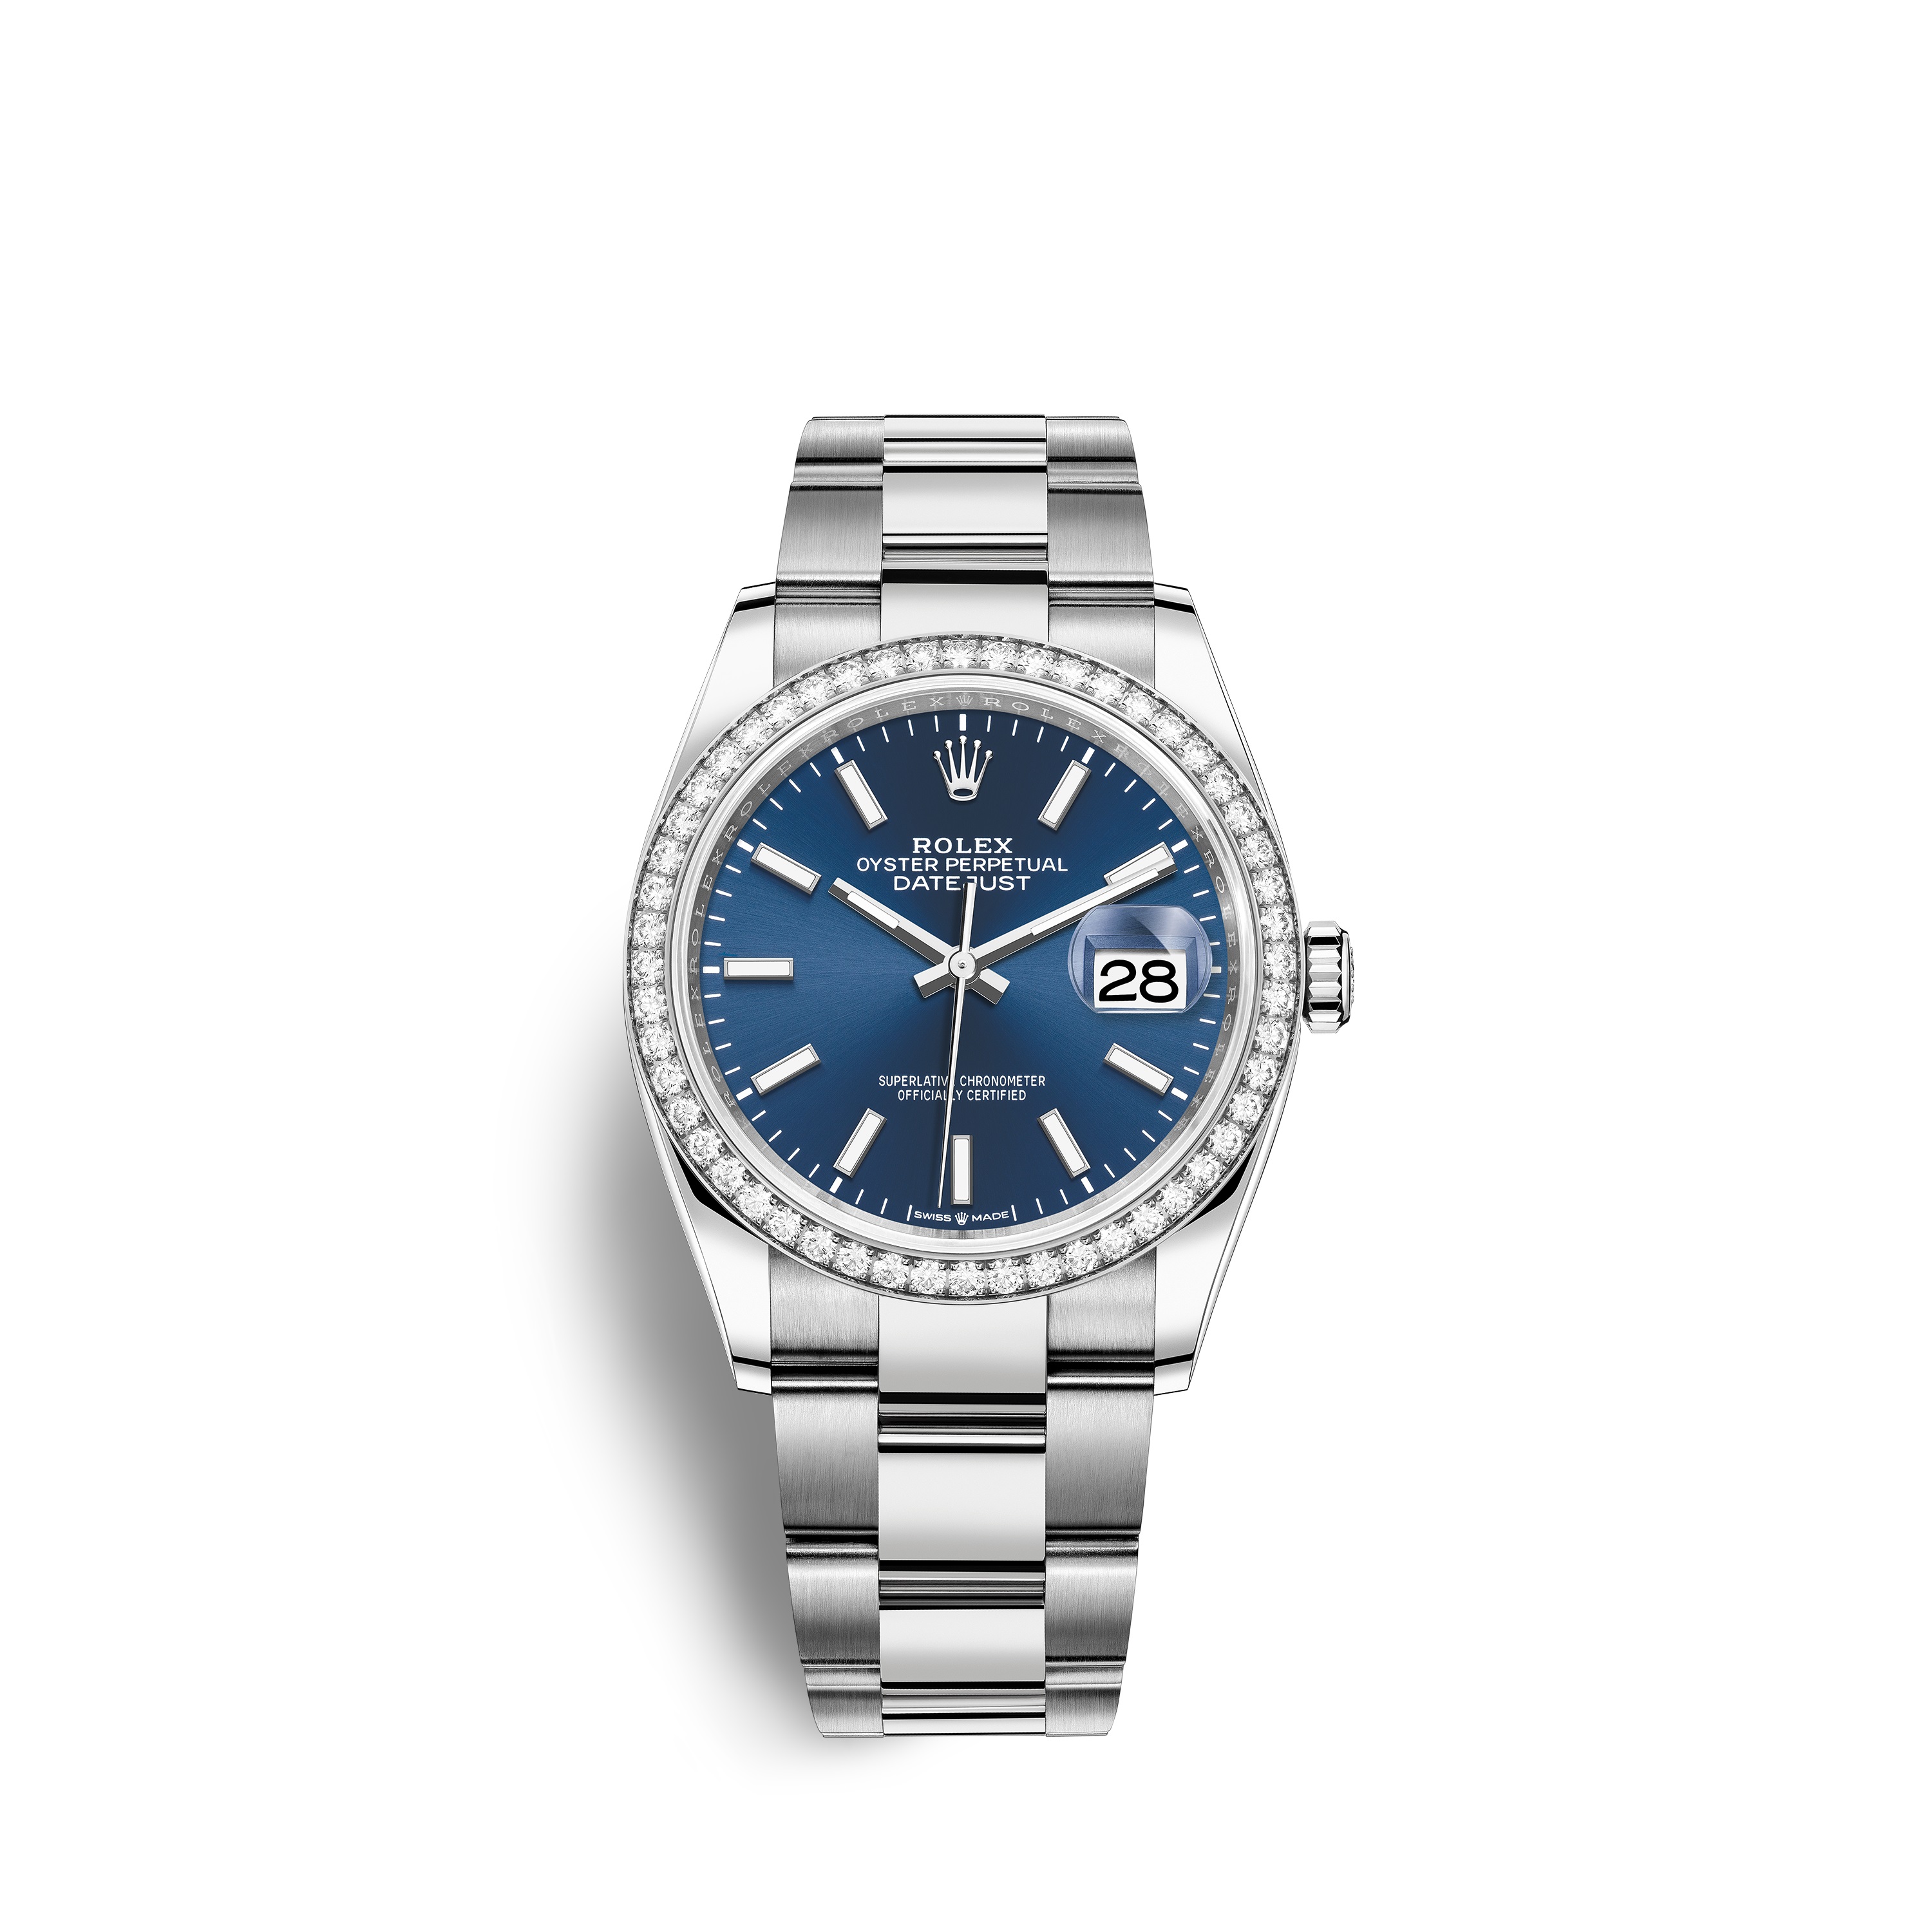 Datejust 36 126284RBR White Gold, Stainless Steel & Diamonds Watch (Blue)